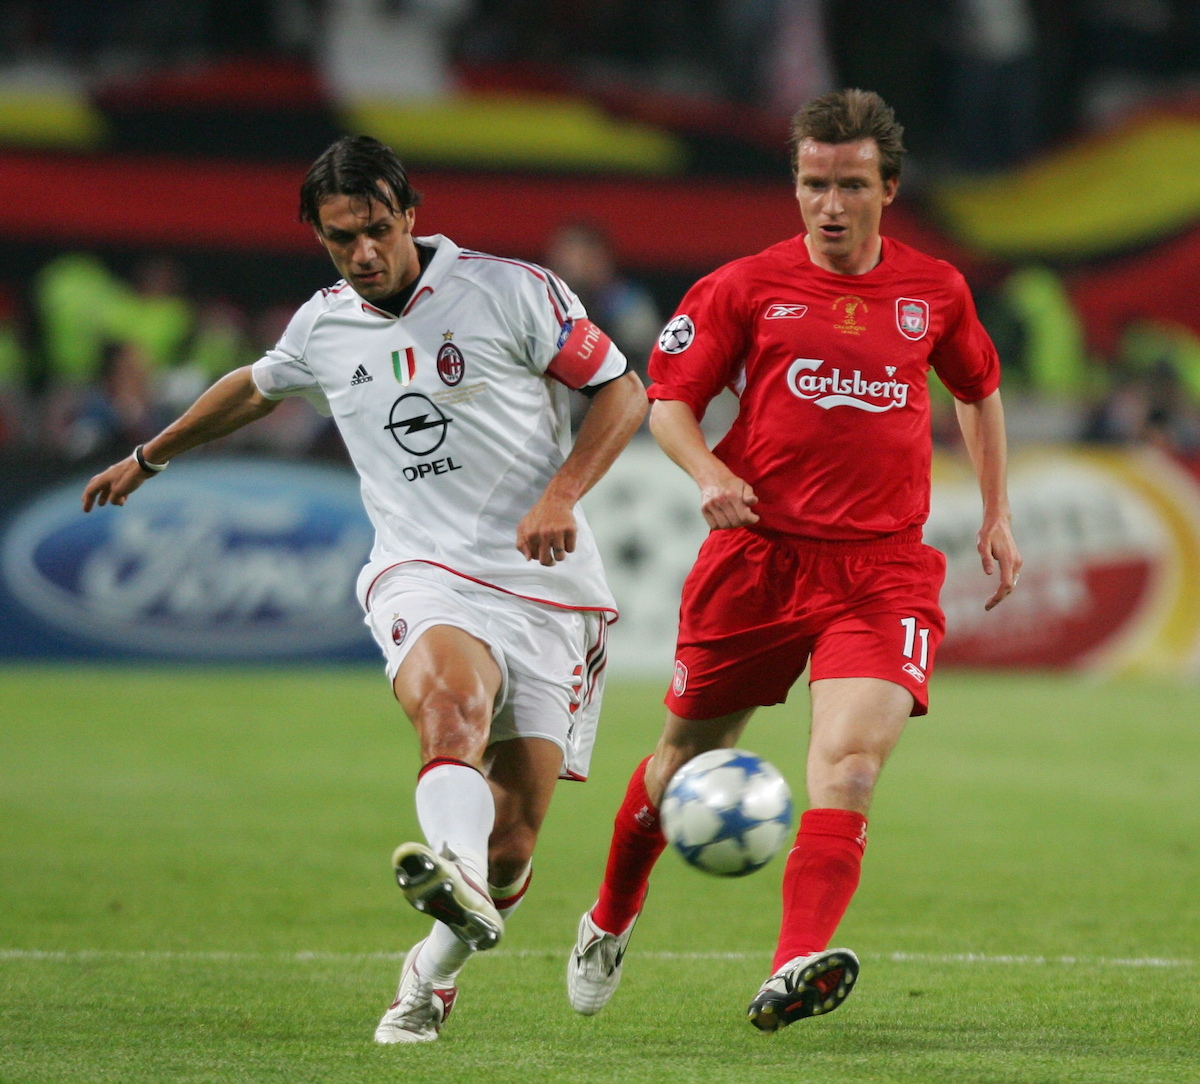 ISTANBUL, TURKEY - WEDNESDAY, MAY 25th, 2005: Liverpool's Vladimir Smicer and AC Milan's Paulo Maldini during the UEFA Champions League Final at the Ataturk Olympic Stadium, Istanbul. (Pic by David Rawcliffe/Propaganda)